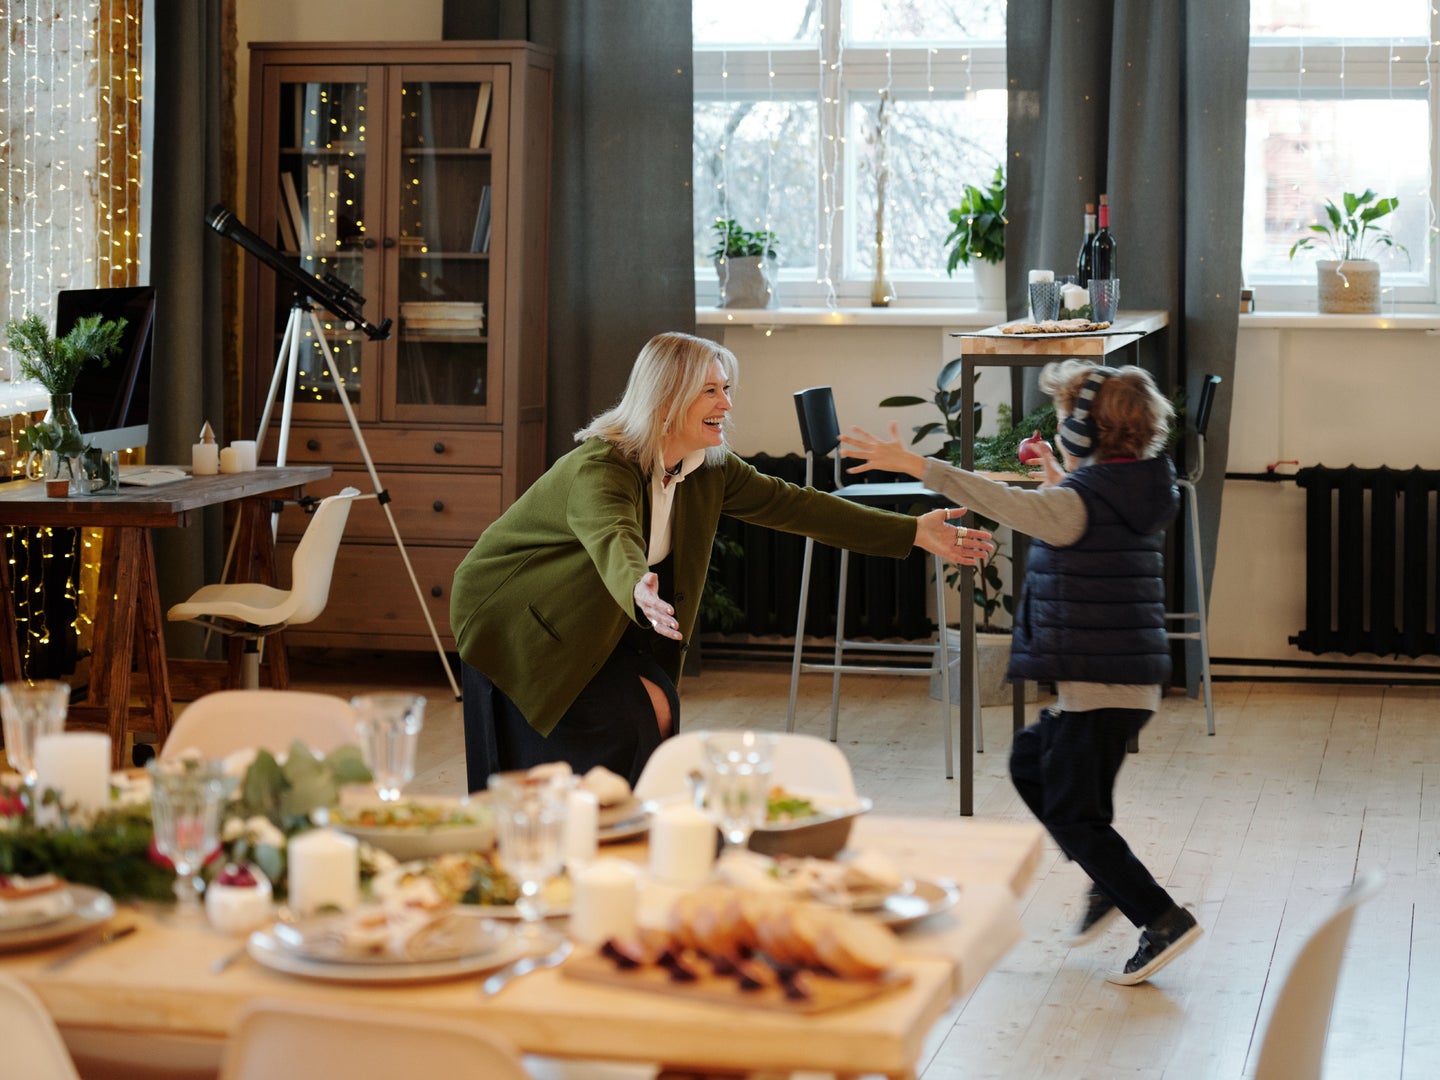 A blonde child running with open arms toward an elderly woman who is ready to hug him, in a room decorated for the holidays with a lot of food on the table.